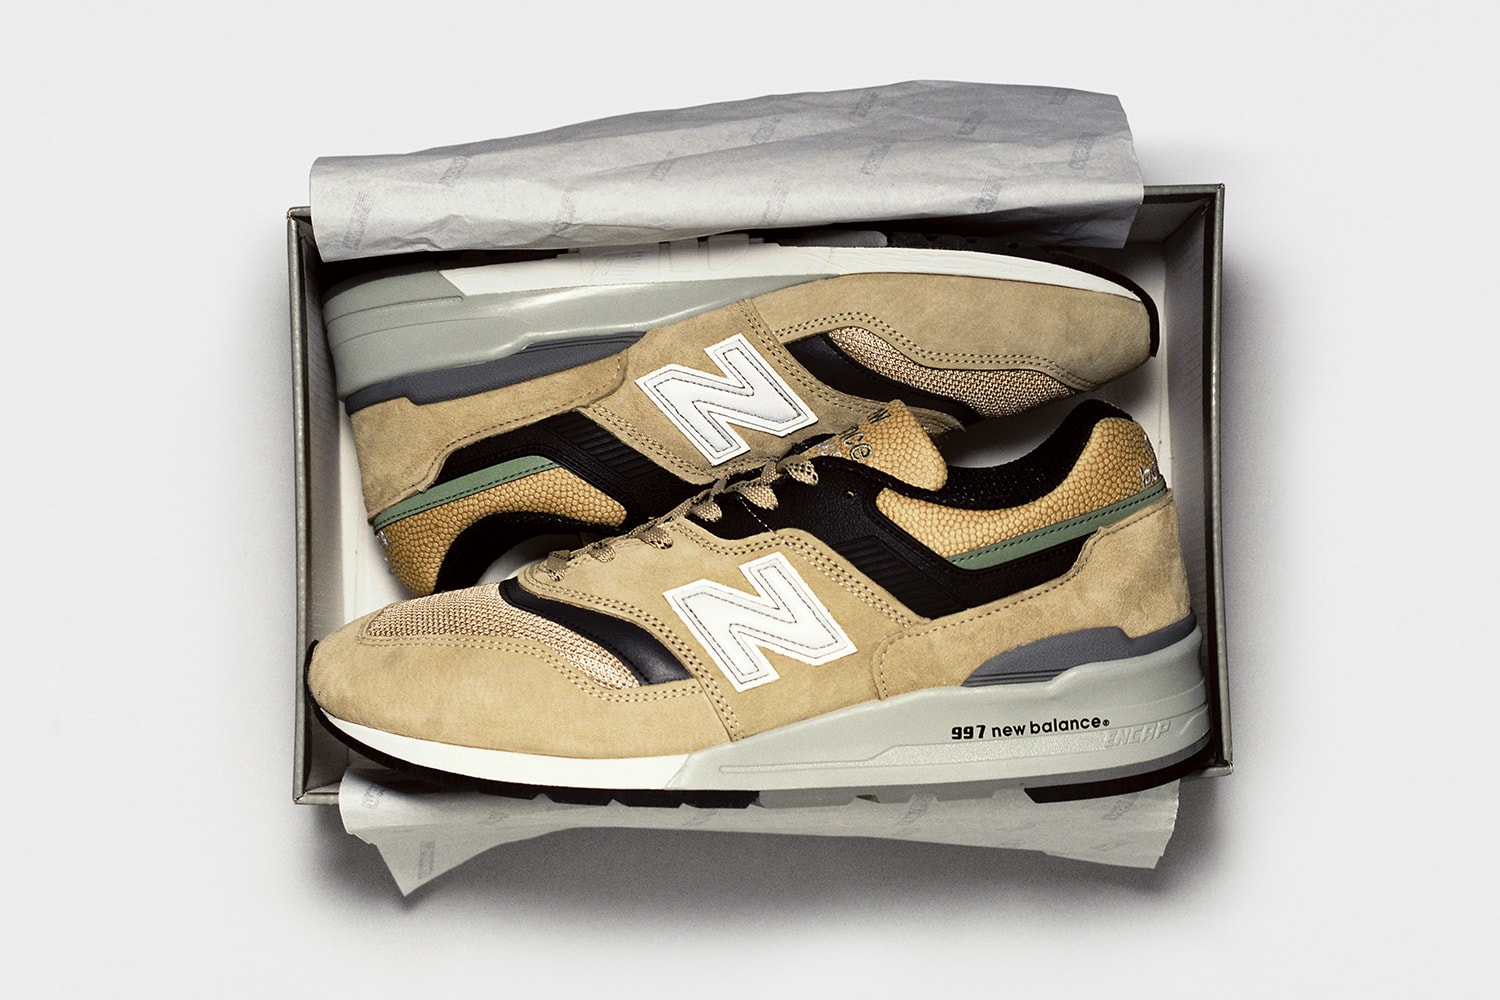 thisisneverthat x New Balance M997 Capsule Collection Physical Fitness Uniform II military U.S. release date price info beige suede leather collaboration range korean brand  